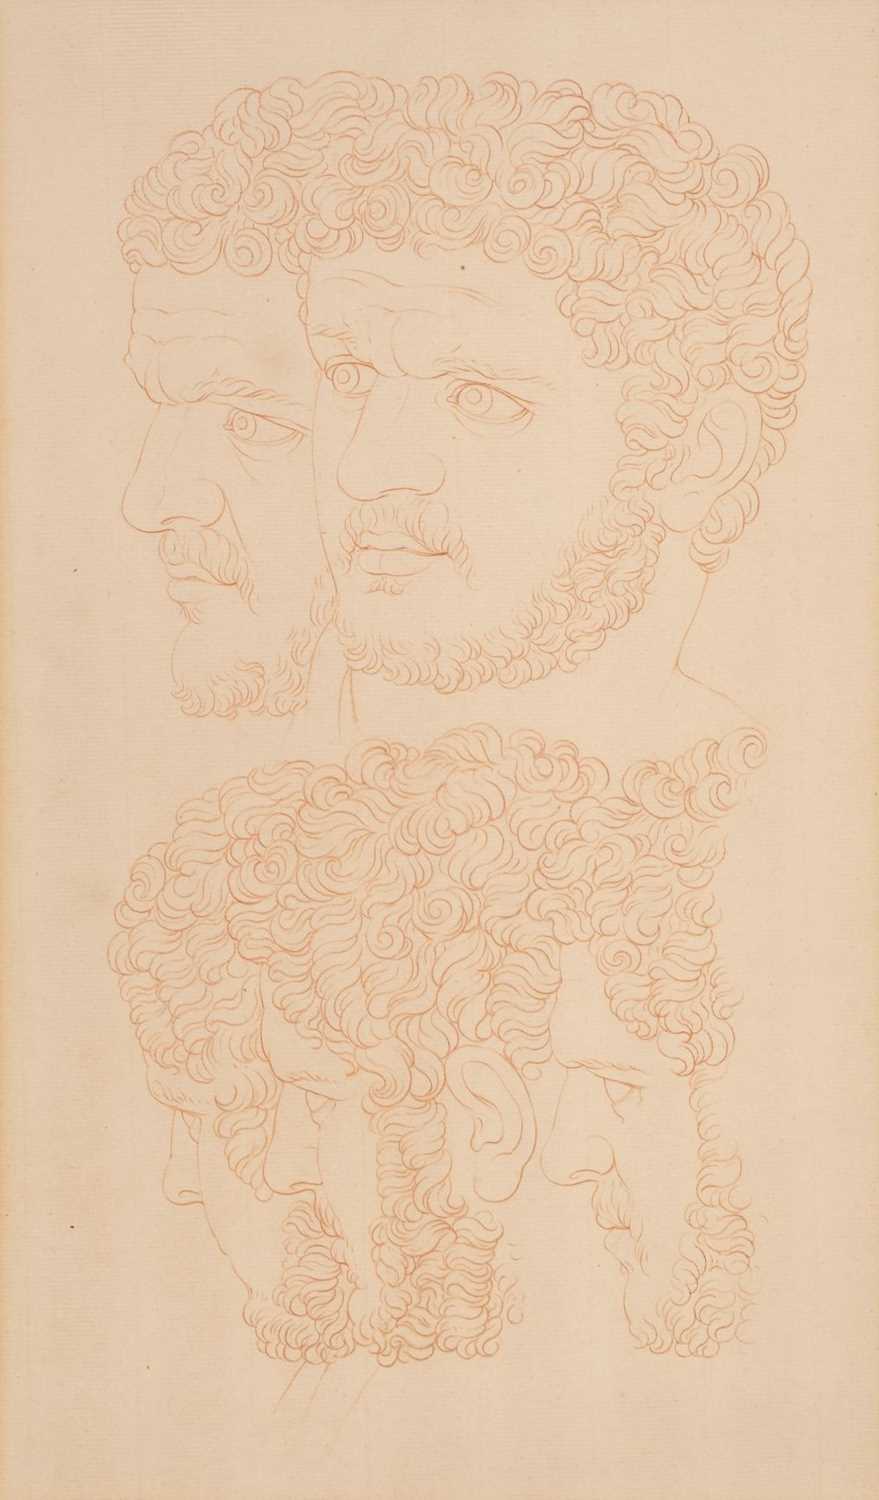 Lot 29 - Hussey, Giles (1710-1788, Attributed to), Bust of Caligula, sanguine chalk on laid paper